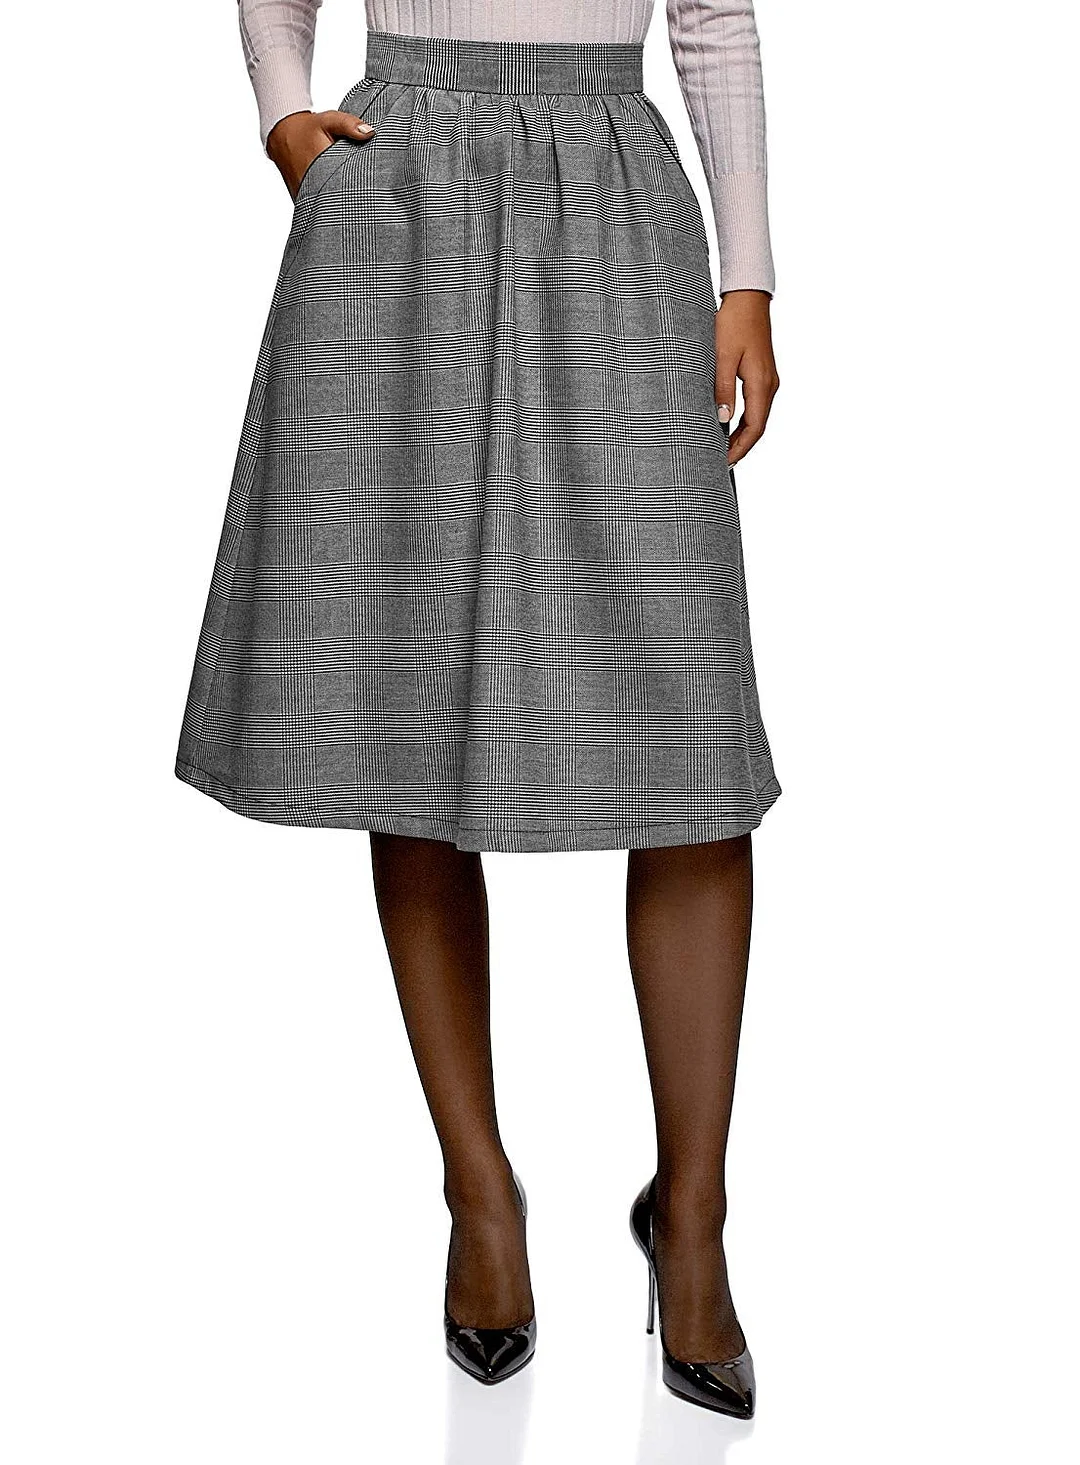 Flared Midi skirt Women's A-Line Skirt with Pockets